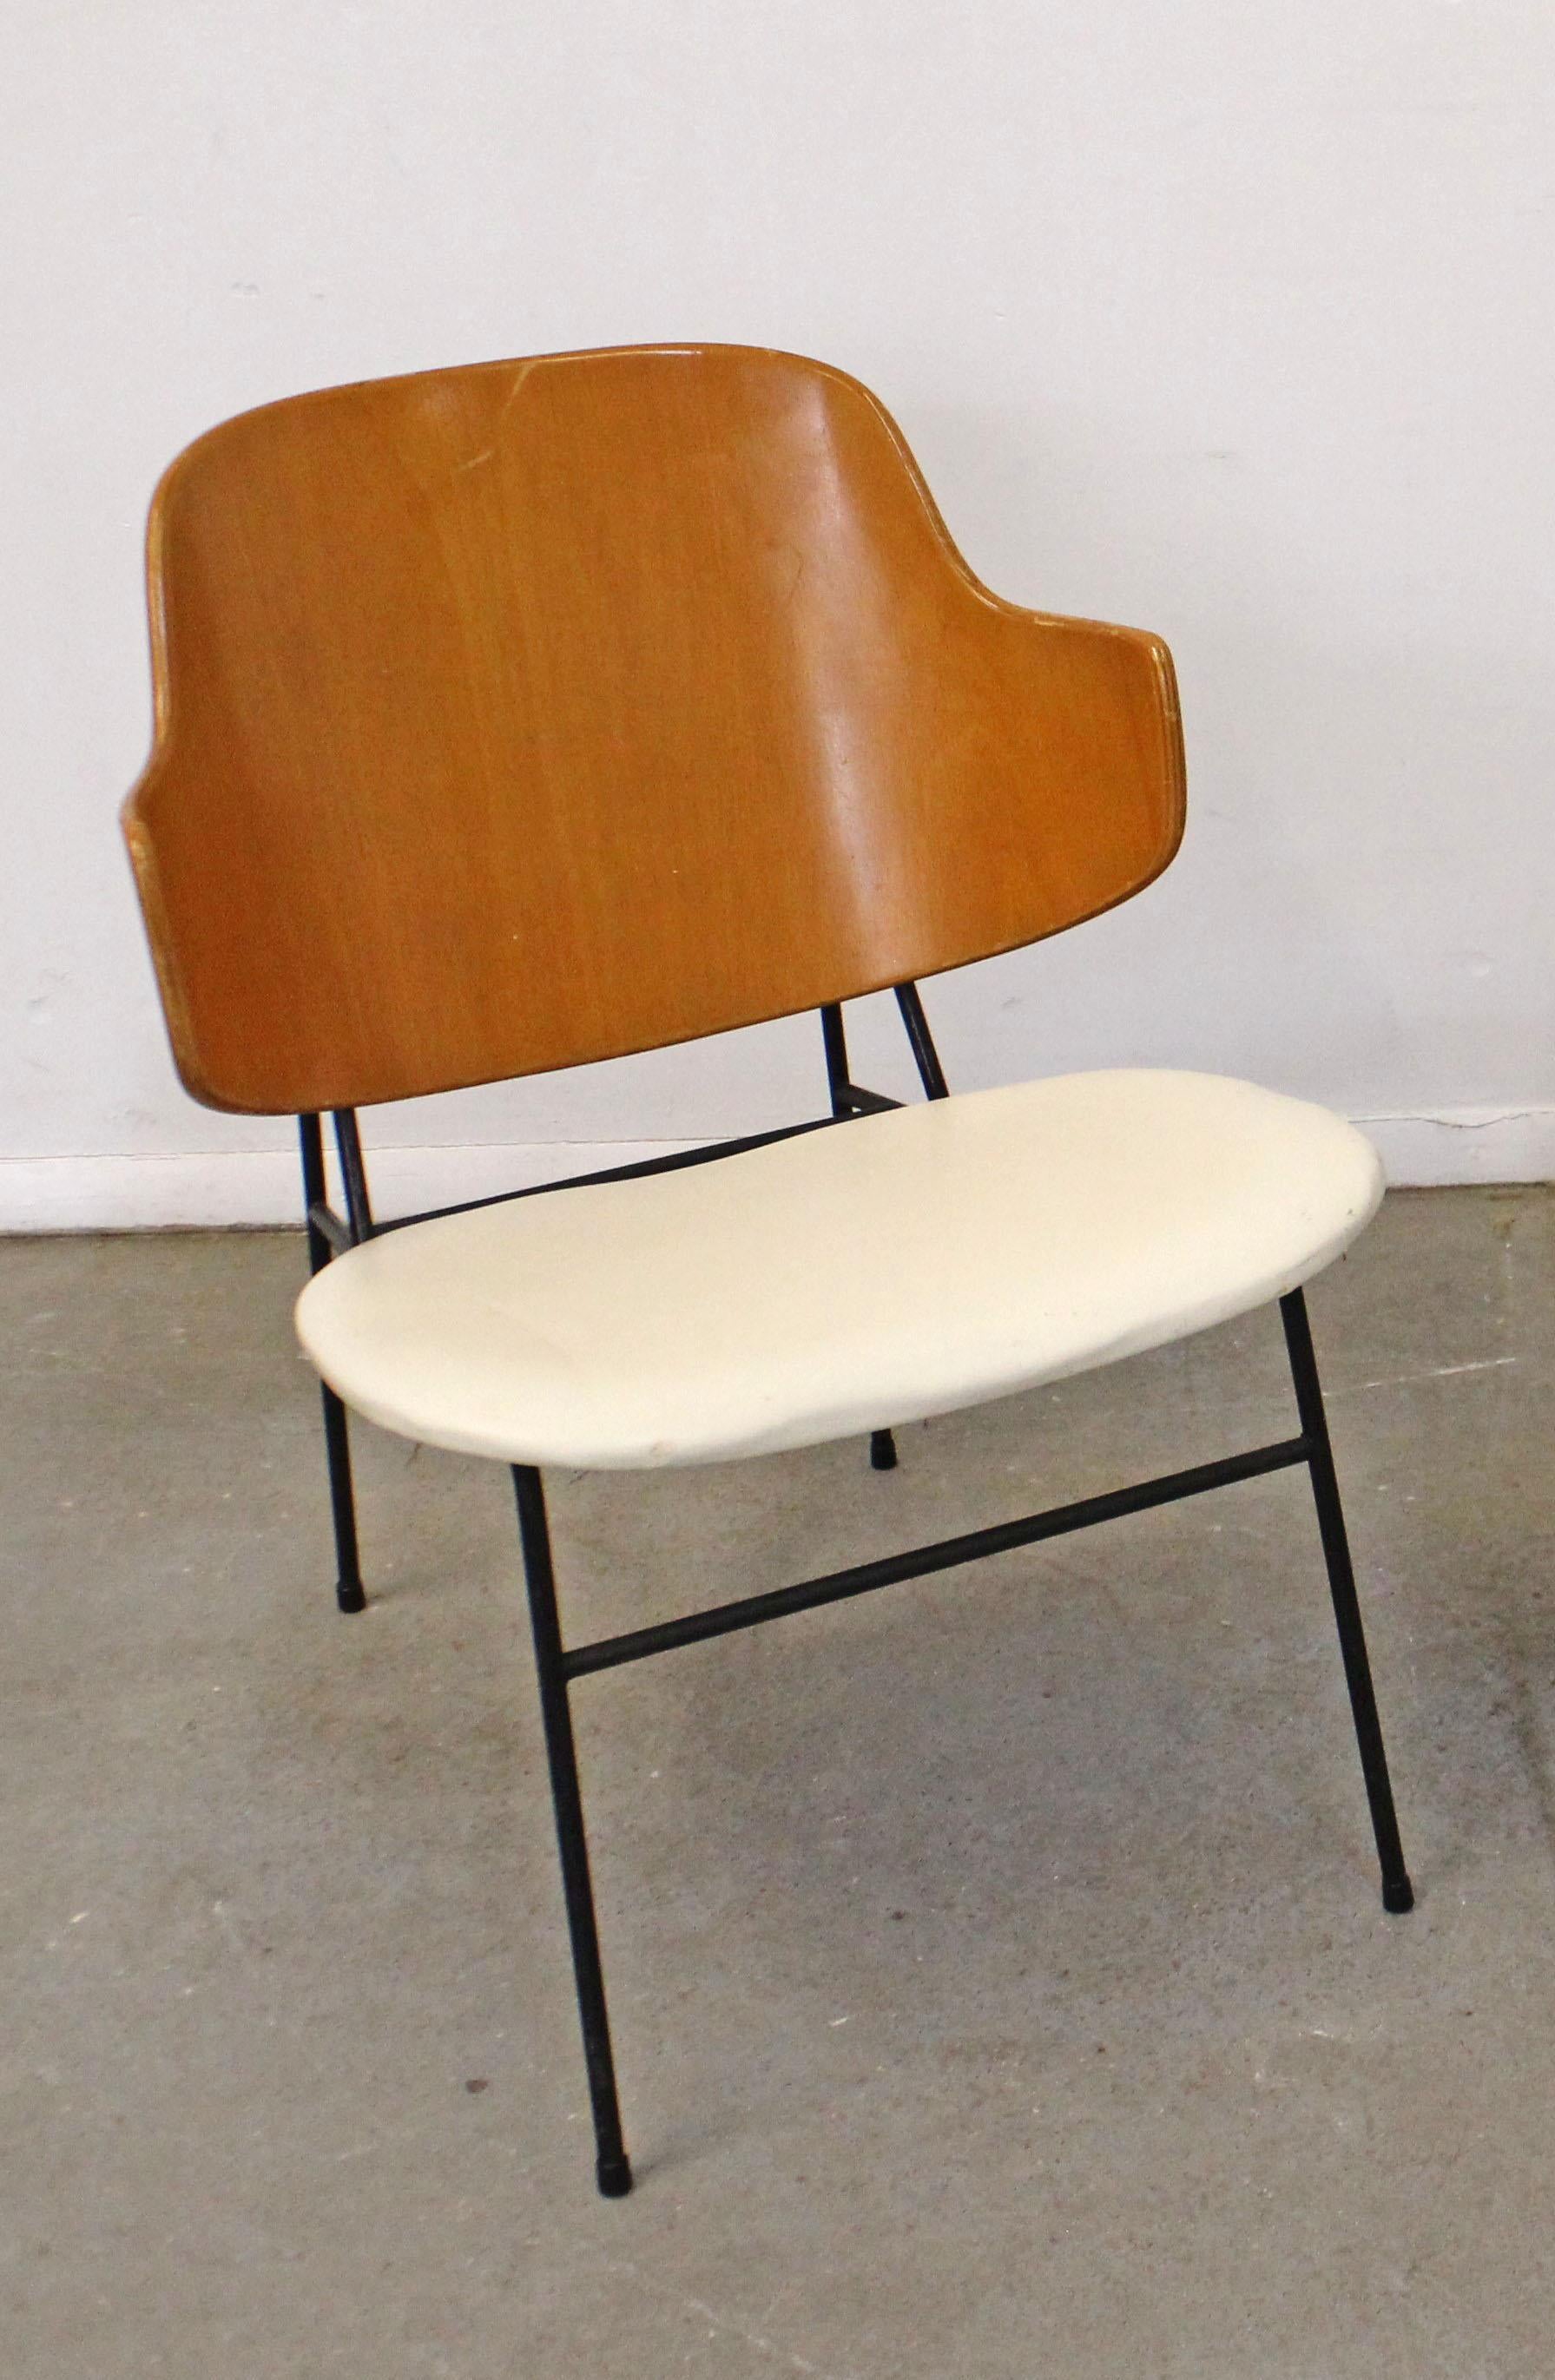 What a find. Offered is an original 'Penguin' chair designed by IB Kofod Larsen for Selig. This chair was designed in 1953 and had a limited production through the 1960s. This chair has a metal base, wood back, and vinyl seat. In good, structurally